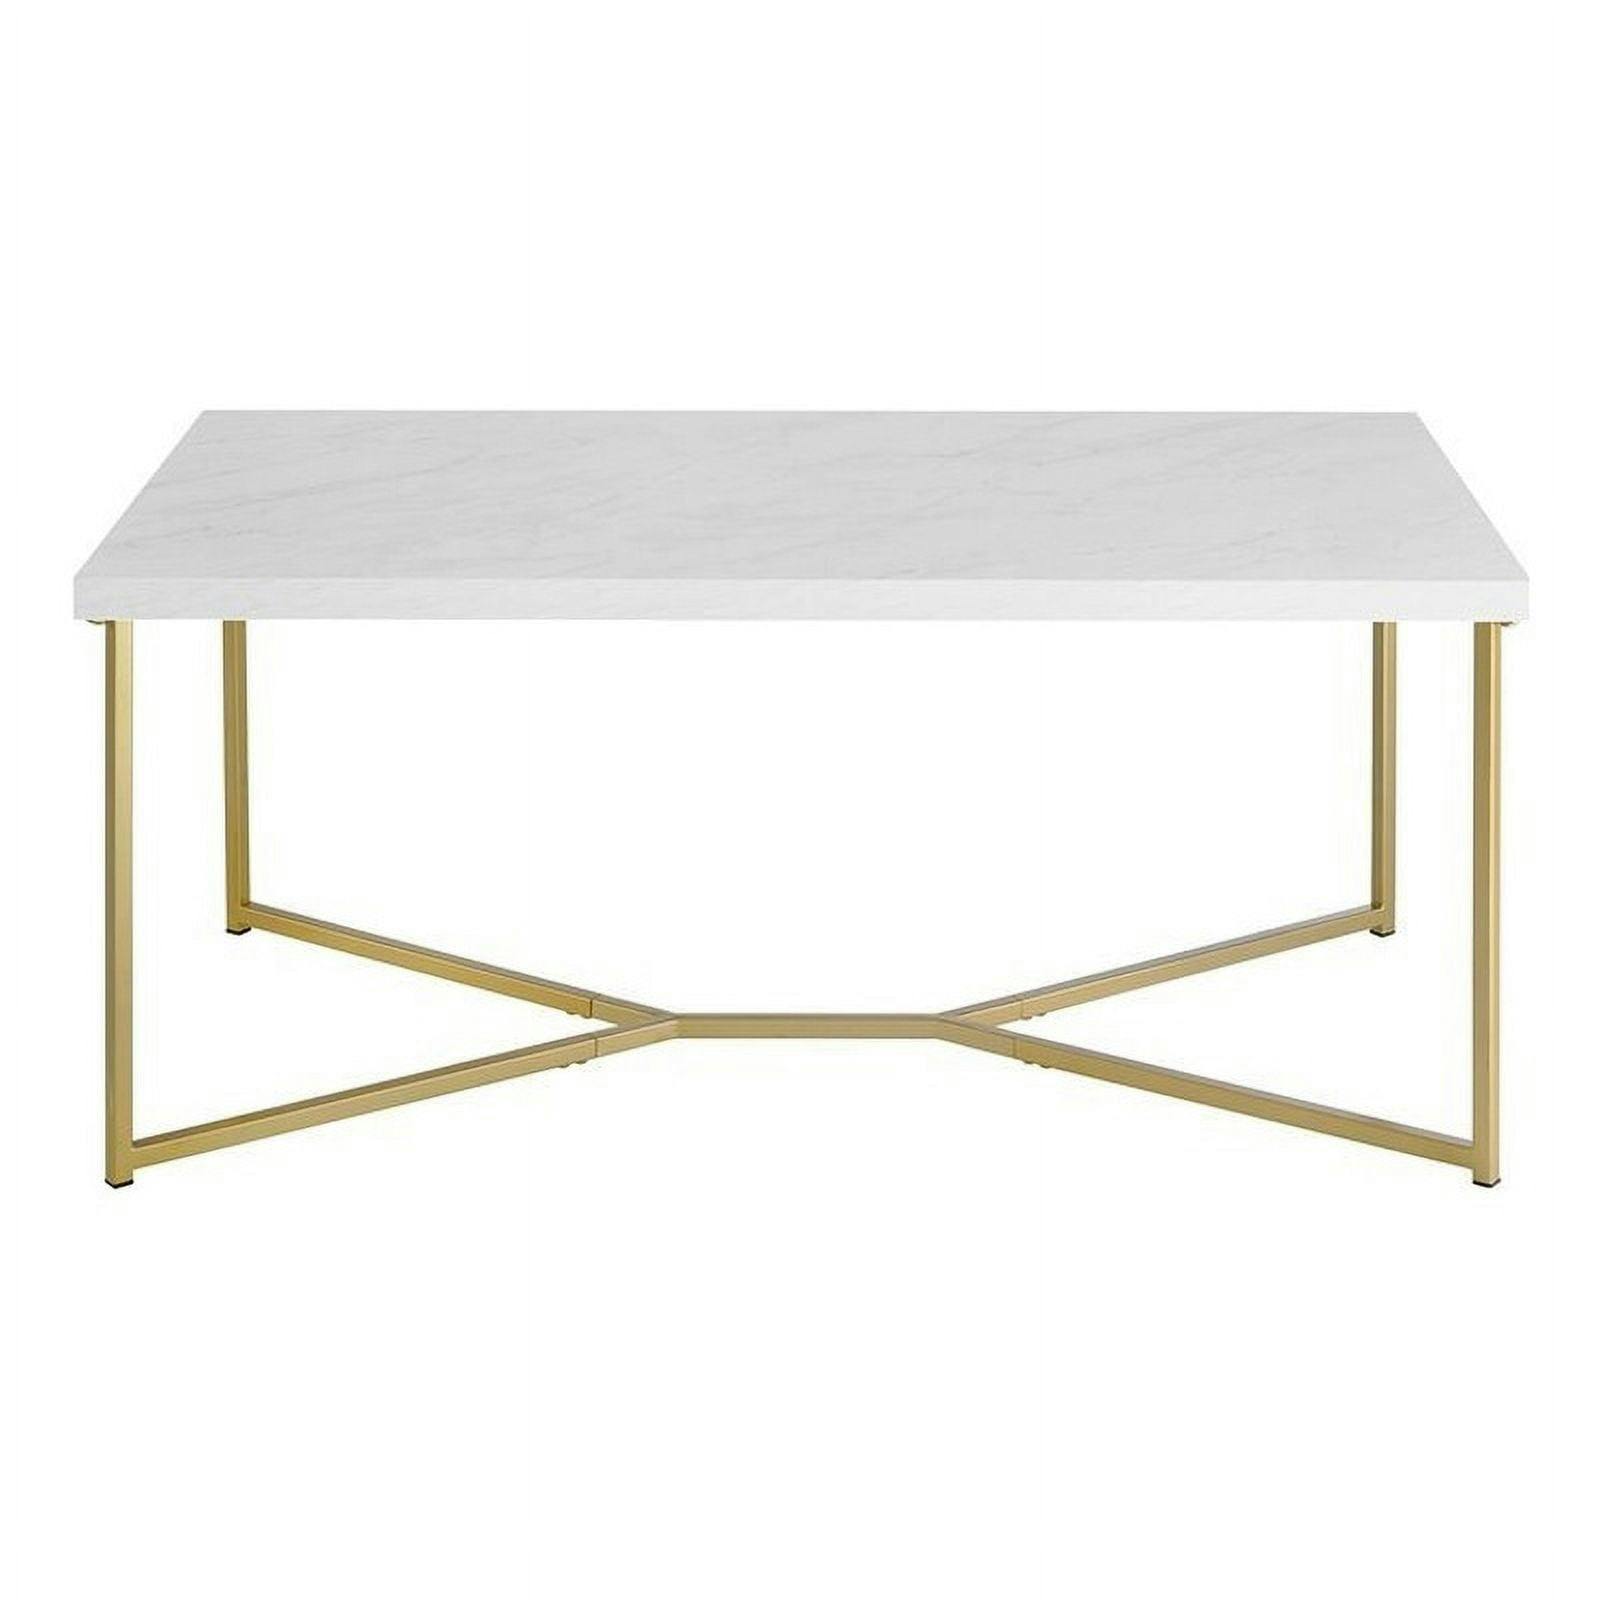 Elegant White Faux Marble and Gold Metal Rectangular Coffee Table